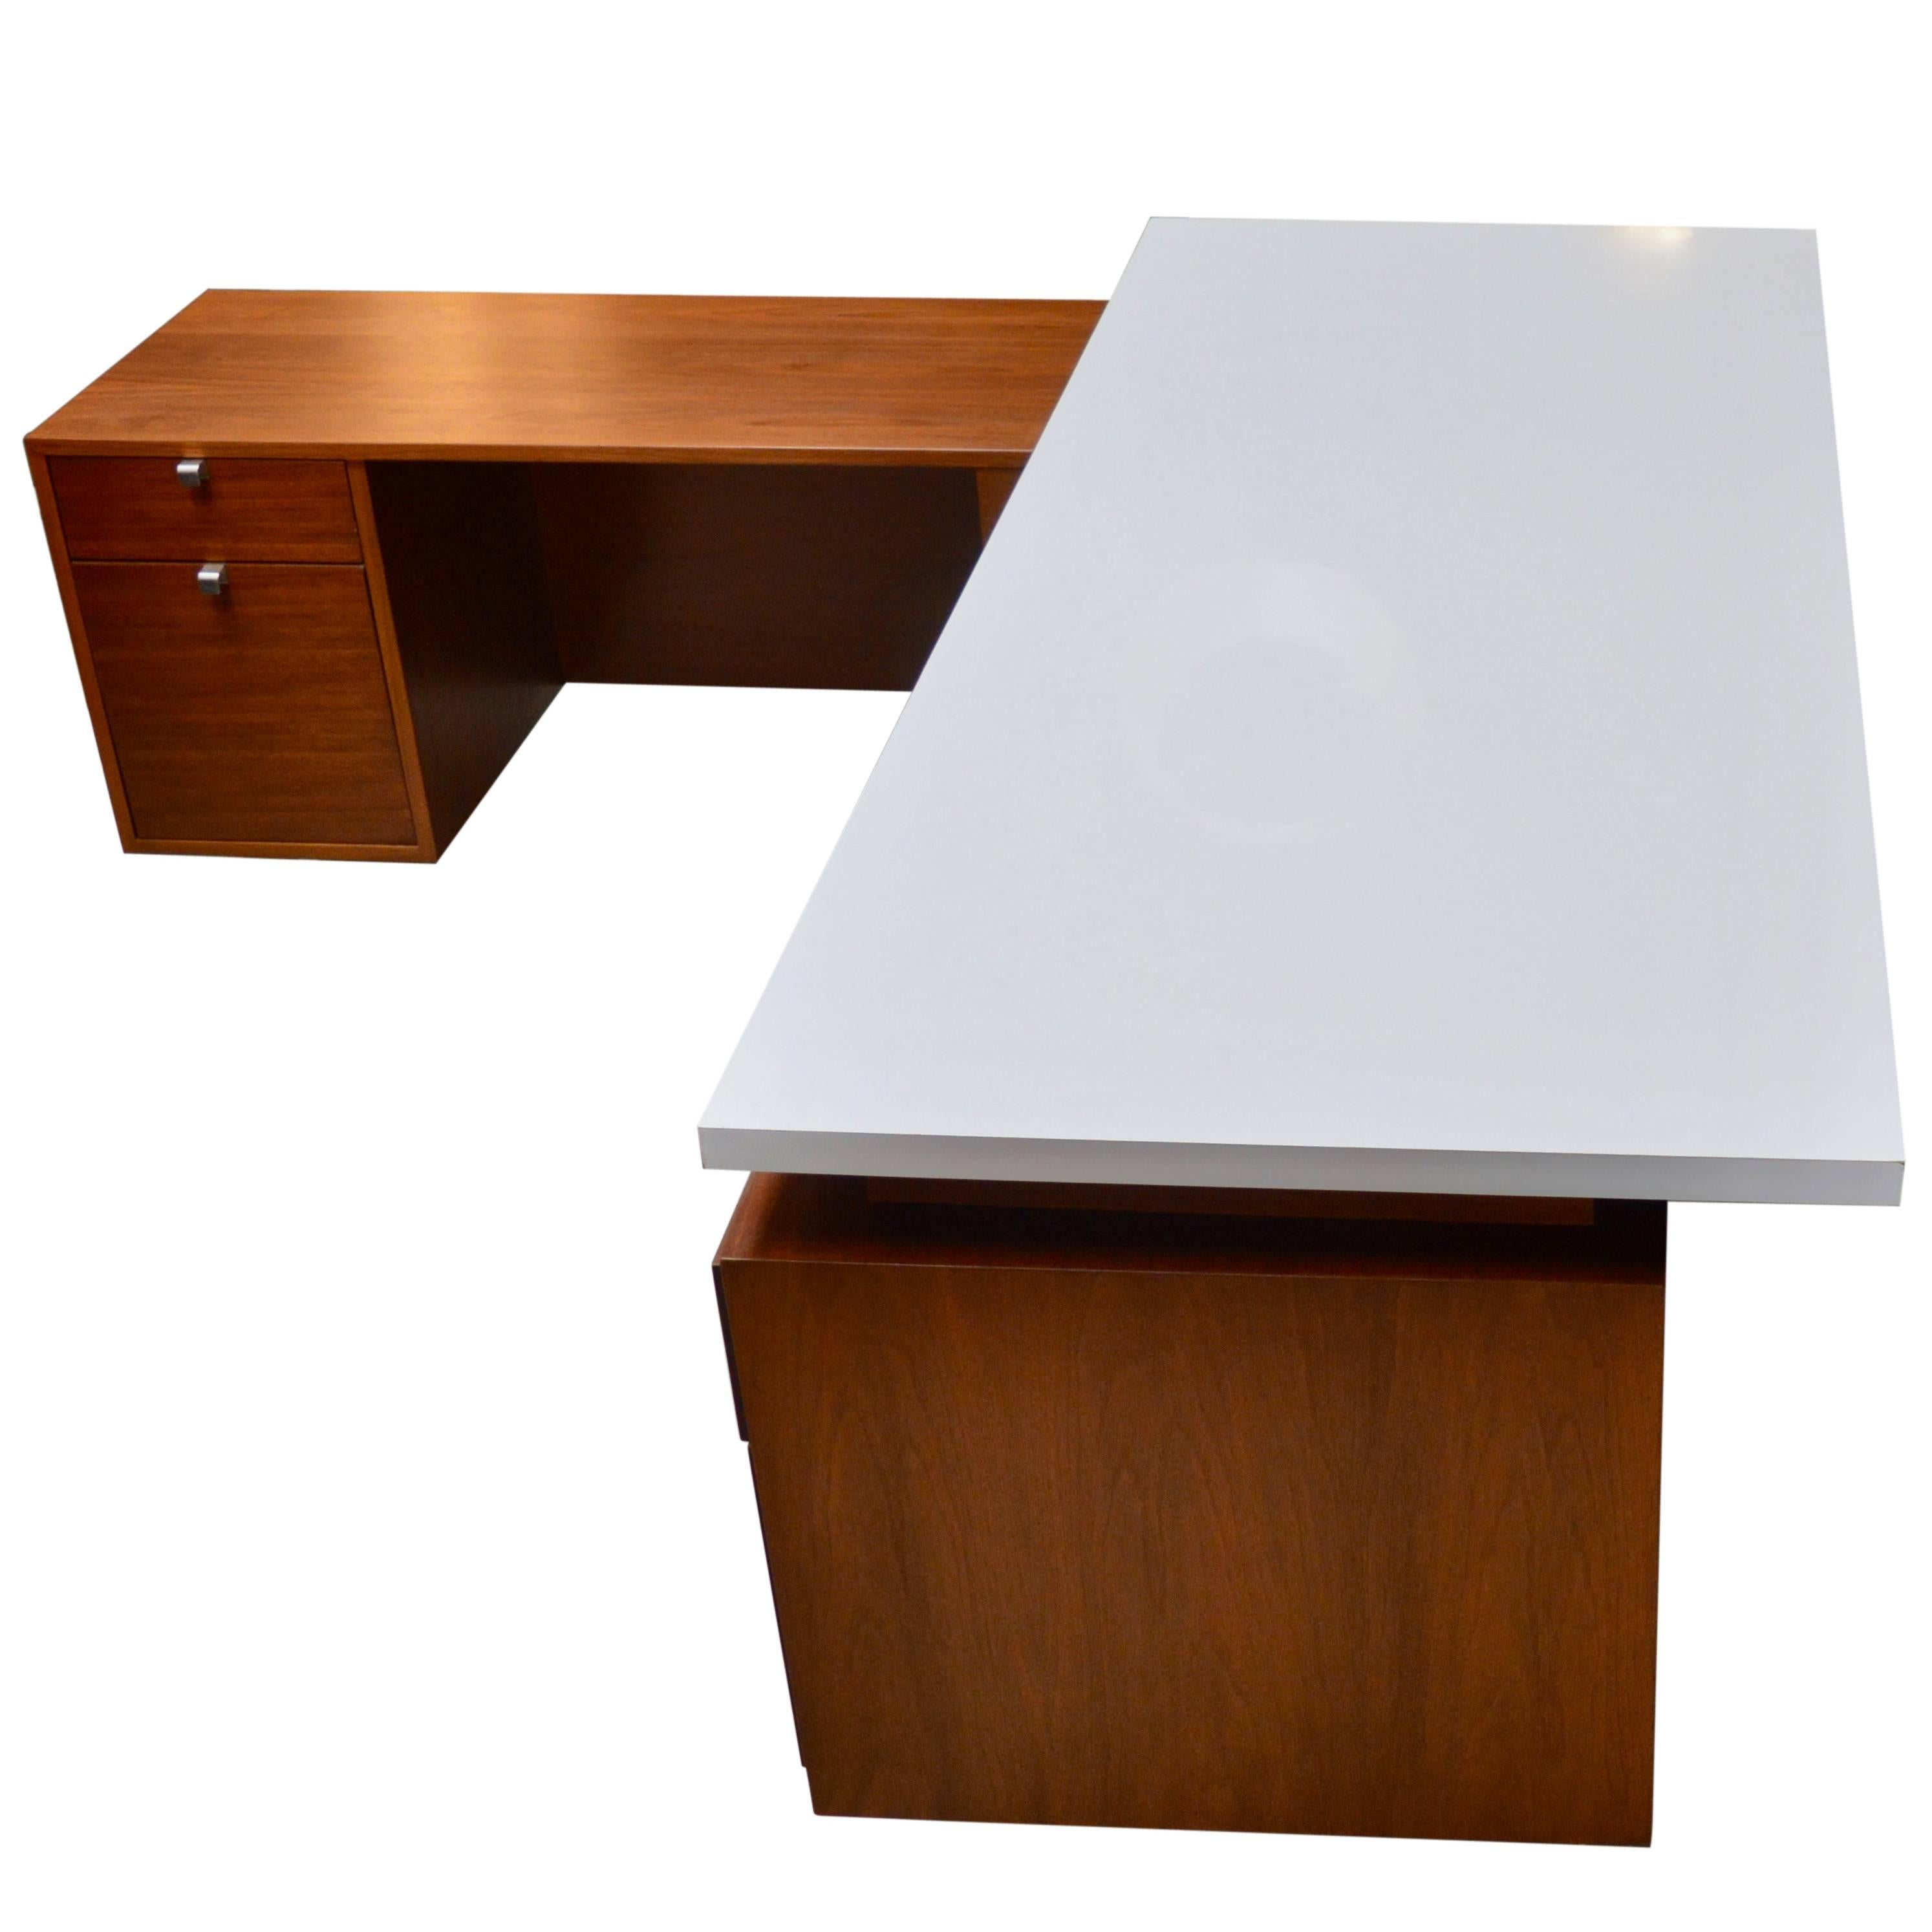 Fantastic desk by George Nelson for Herman Miller. Special custom size. Newly veneered white desktop with dry-erase formica. Allows you to write on the desktop! Walnut desk with chrome hardware. Able to work at the desk or turn to the side and work